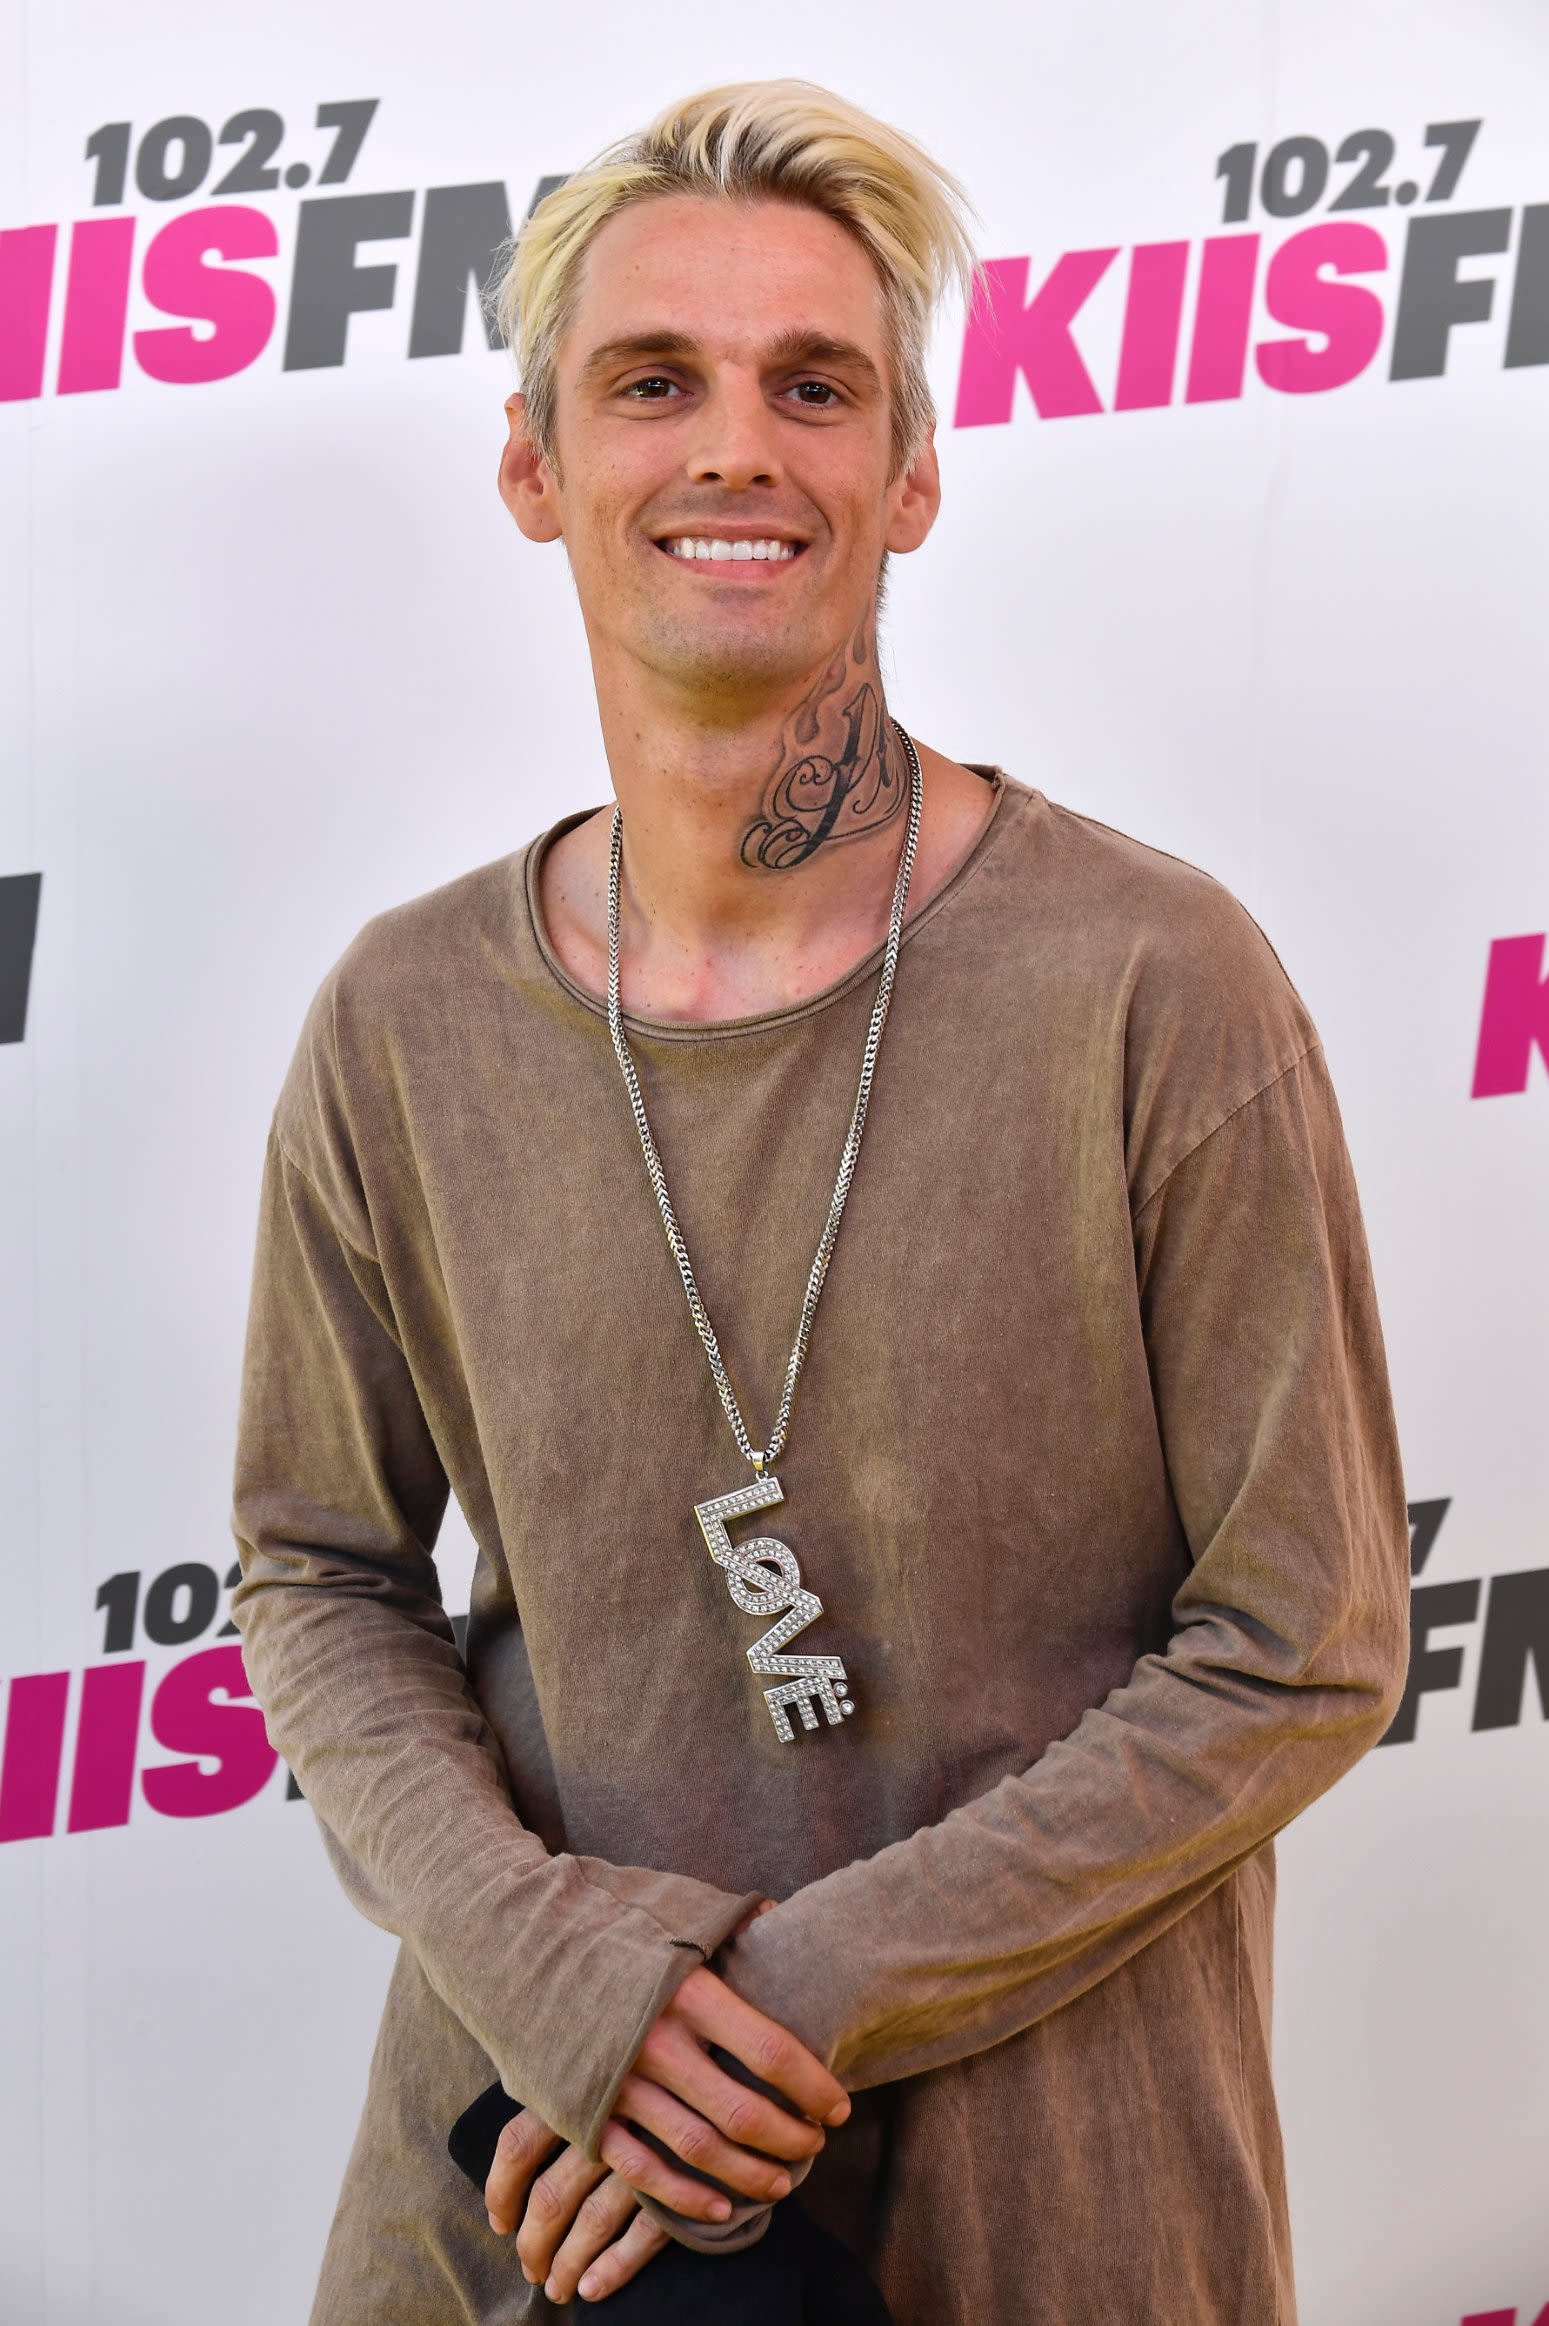 Aaron Carter comes out as bisexual | CNN